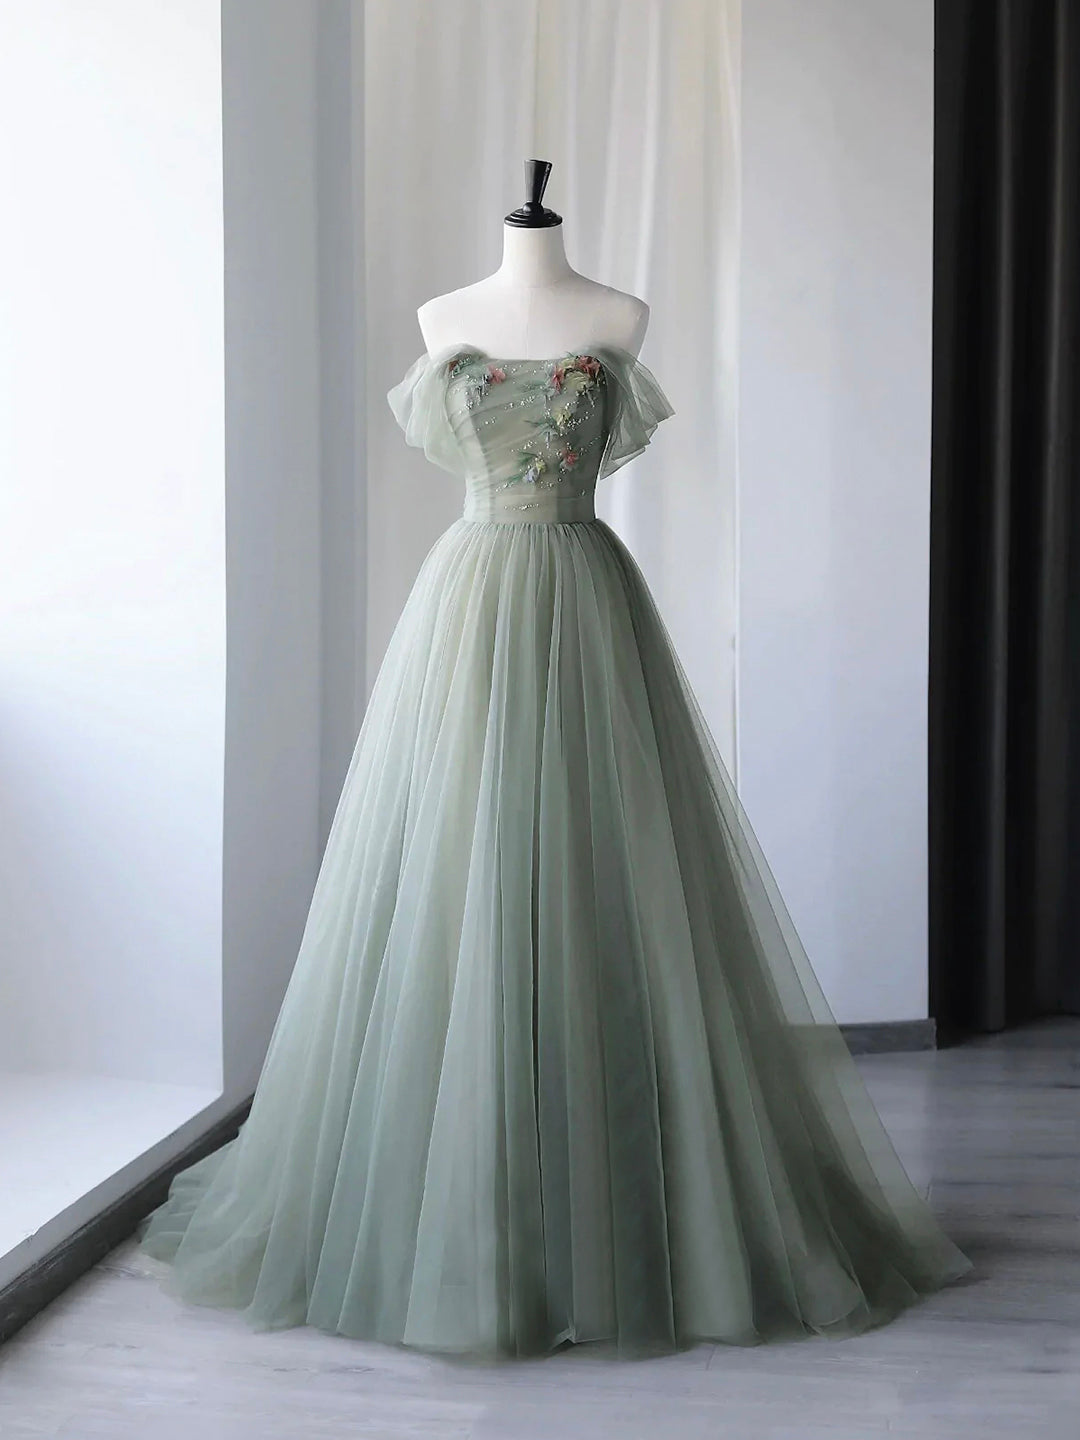 Beautiful Green Tulle Long Corset Prom Dress, Off Shoulder Evening Dress outfit, Bridesmaid Dress Outdoor Wedding